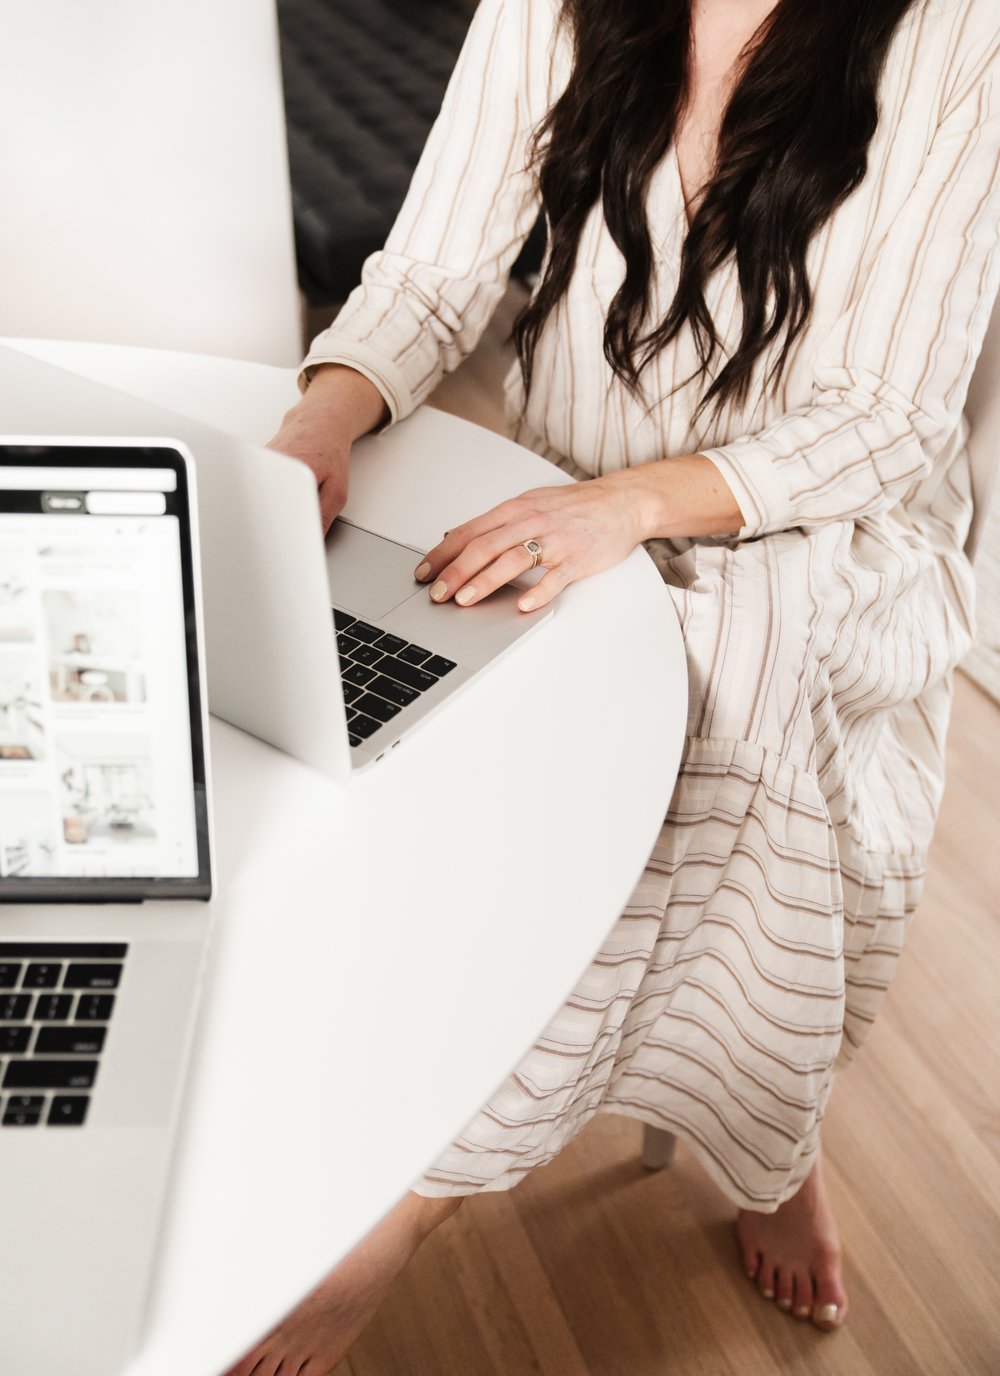 Don't Miss: Blogging Your Way Masterclass - Now Enrolling